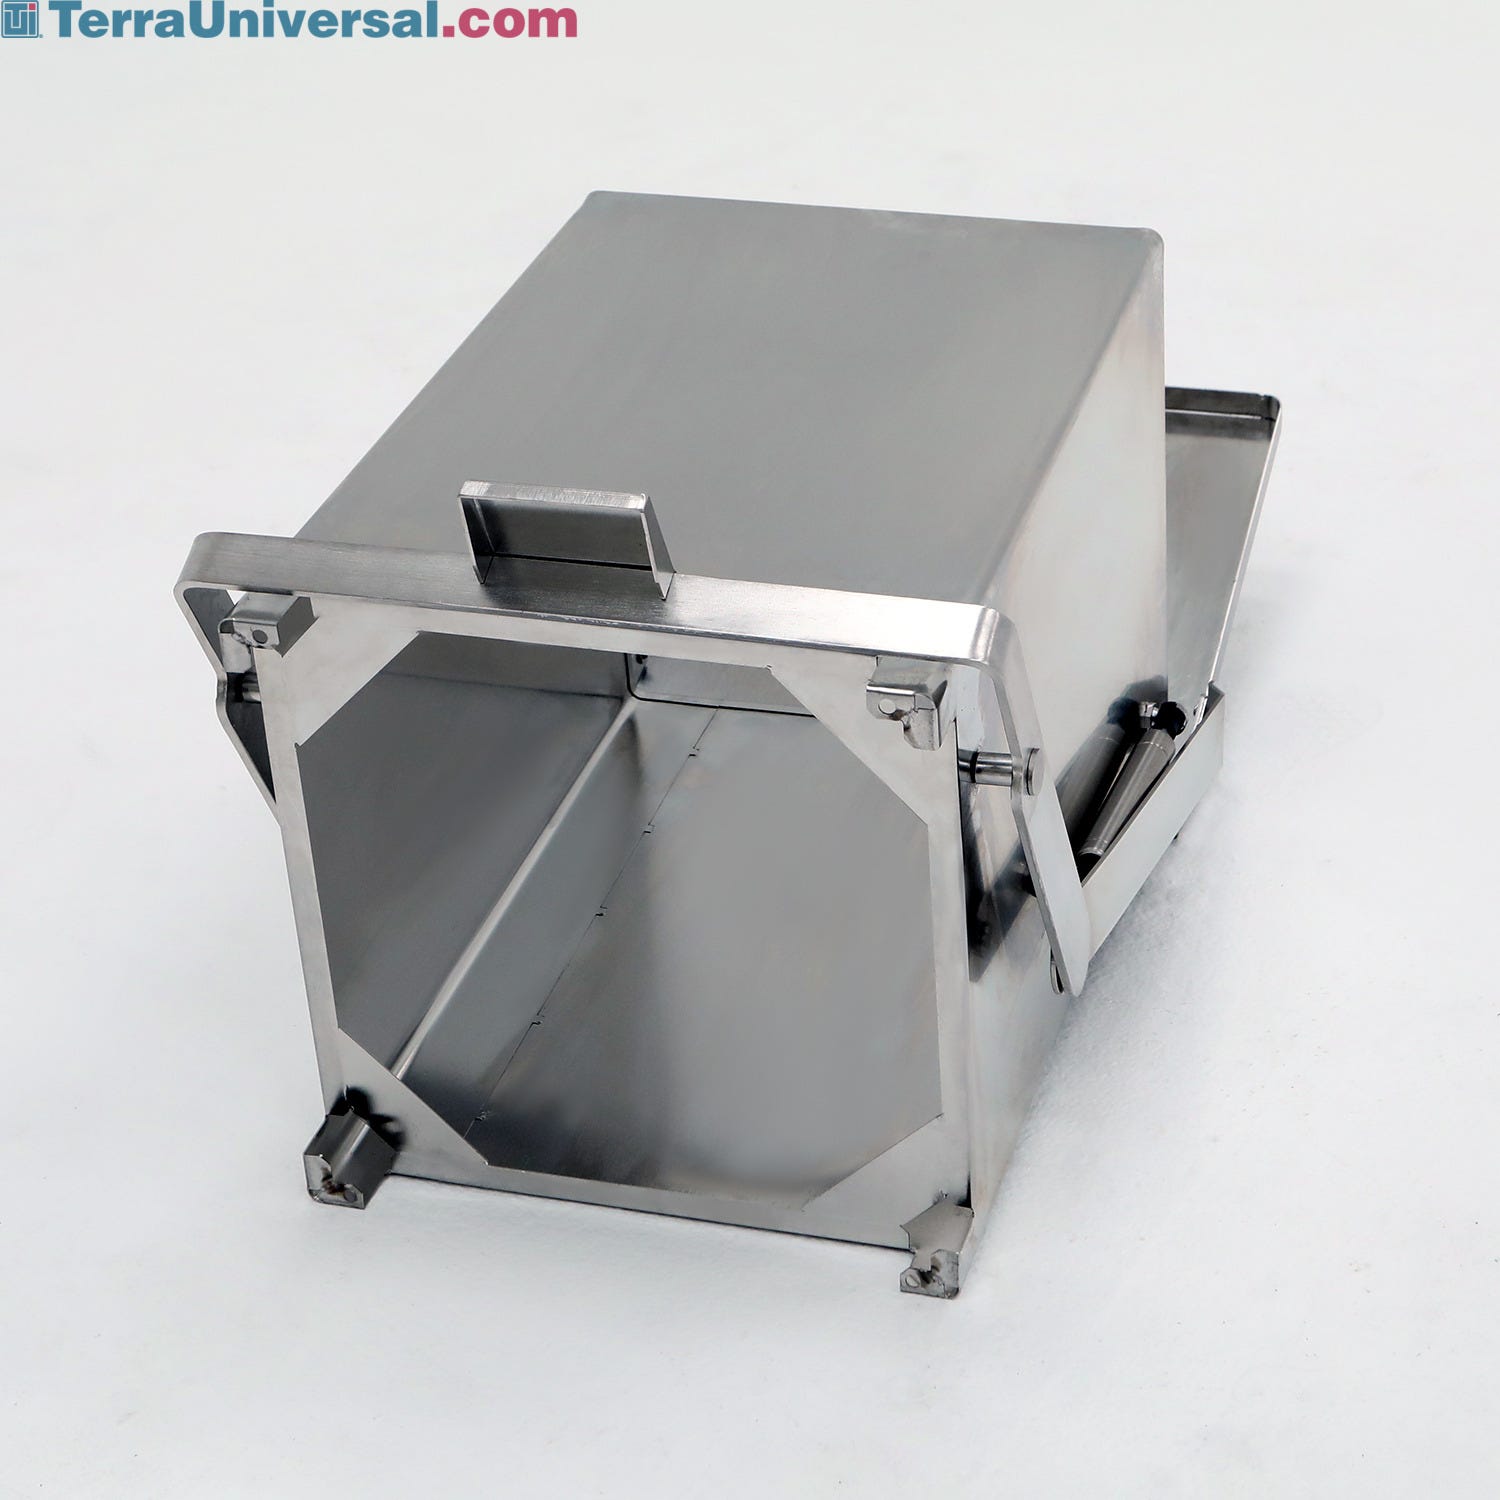 Trash Receptacles; 18 Gallon Cleanroom Waste Bins, Manual Step, Stainless  Steel, Removable Bag Retainer Ring, HL-HLS18SS - Cleanroom World